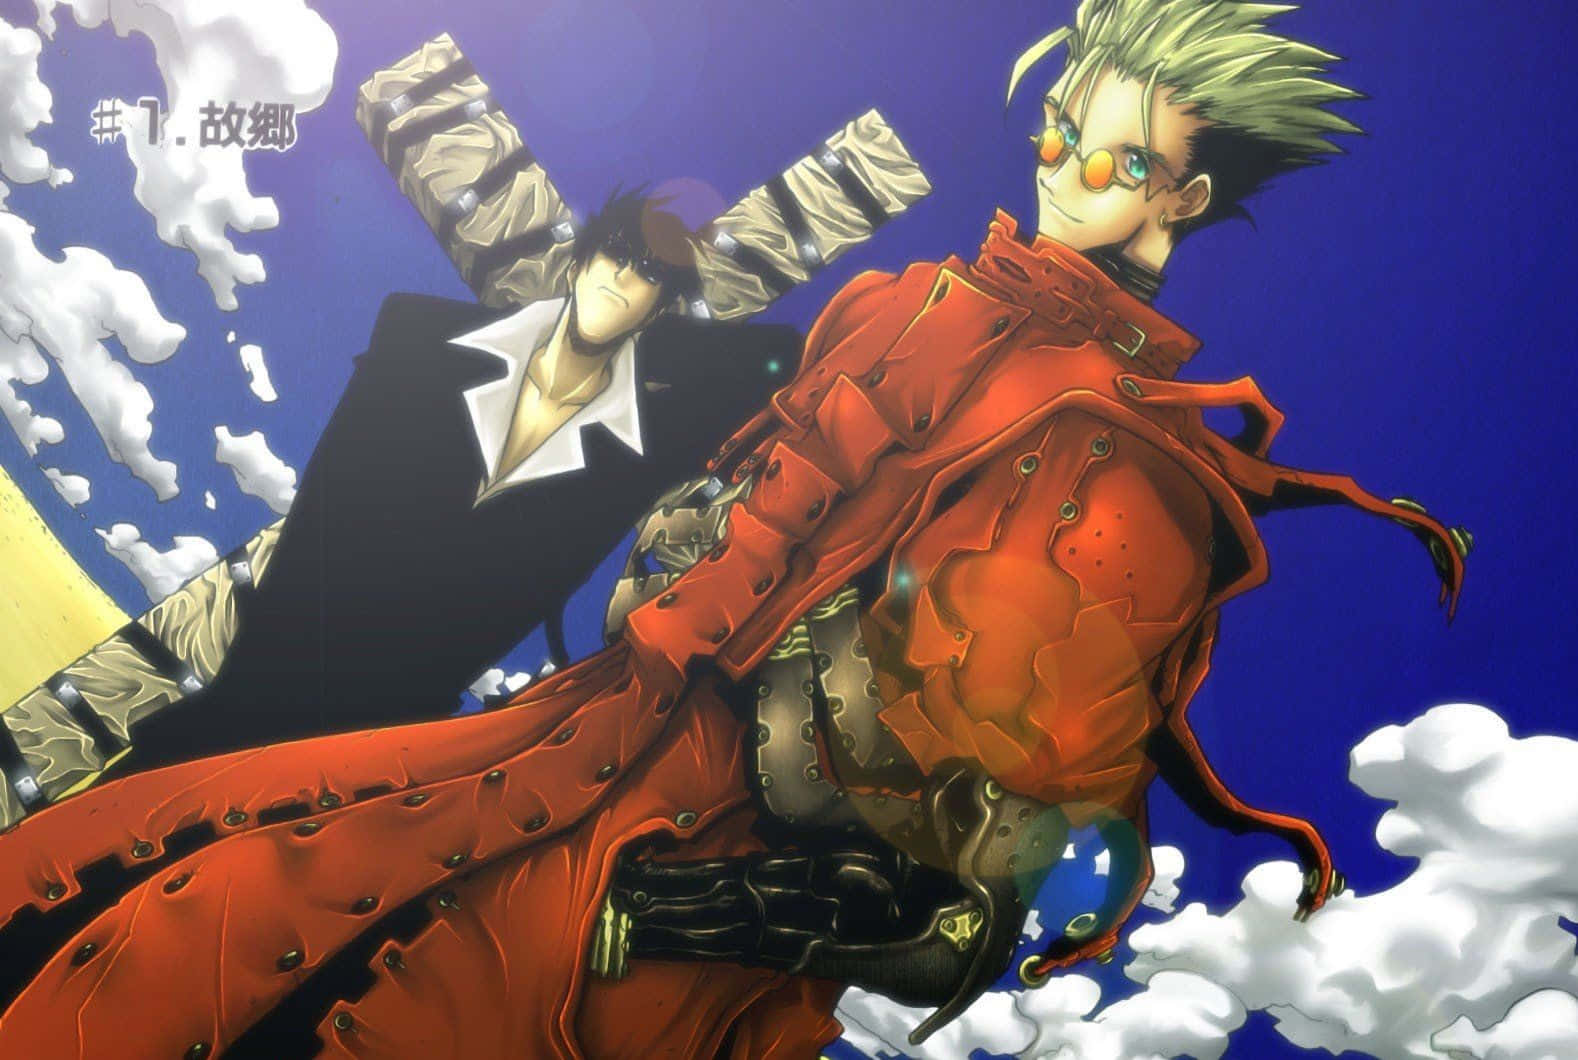 Vash the Stampede takes aim in the Western-styled town of Gunsmoke